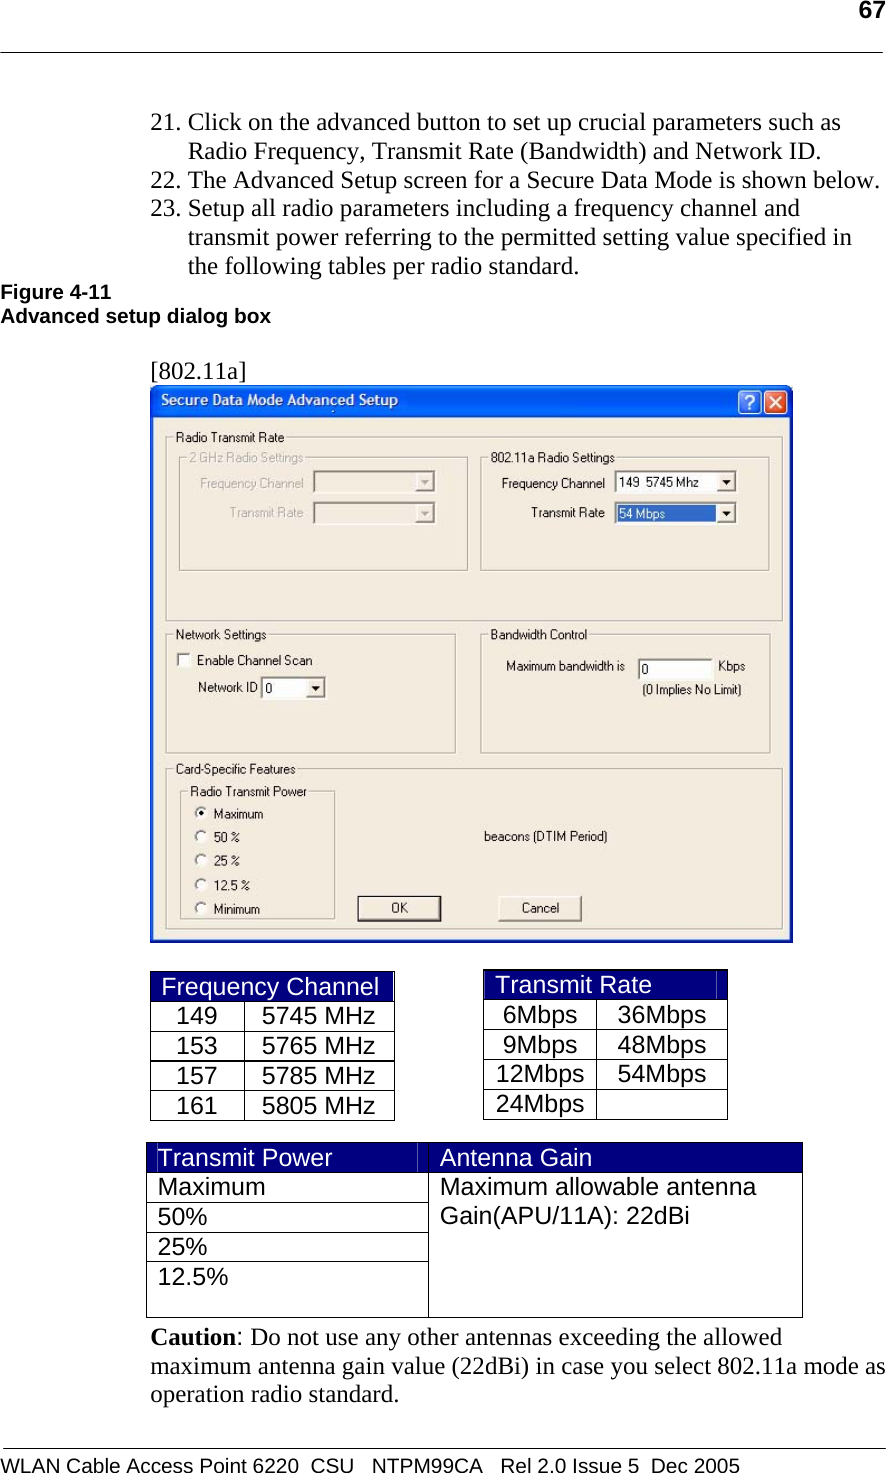   67  WLAN Cable Access Point 6220  CSU   NTPM99CA   Rel 2.0 Issue 5  Dec 2005 21. Click on the advanced button to set up crucial parameters such as Radio Frequency, Transmit Rate (Bandwidth) and Network ID. 22. The Advanced Setup screen for a Secure Data Mode is shown below.  23. Setup all radio parameters including a frequency channel and transmit power referring to the permitted setting value specified in the following tables per radio standard.  Figure 4-11 Advanced setup dialog box  [802.11a]   Frequency Channel149 5745 MHz153 5765 MHz157 5785 MHz161 5805 MHz       Caution: Do not use any other antennas exceeding the allowed maximum antenna gain value (22dBi) in case you select 802.11a mode as operation radio standard.  Transmit Rate 6Mbps 36Mbps 9Mbps 48Mbps 12Mbps 54Mbps 24Mbps  Transmit Power  Antenna Gain Maximum 50% 25% 12.5% Maximum allowable antenna  Gain(APU/11A): 22dBi    